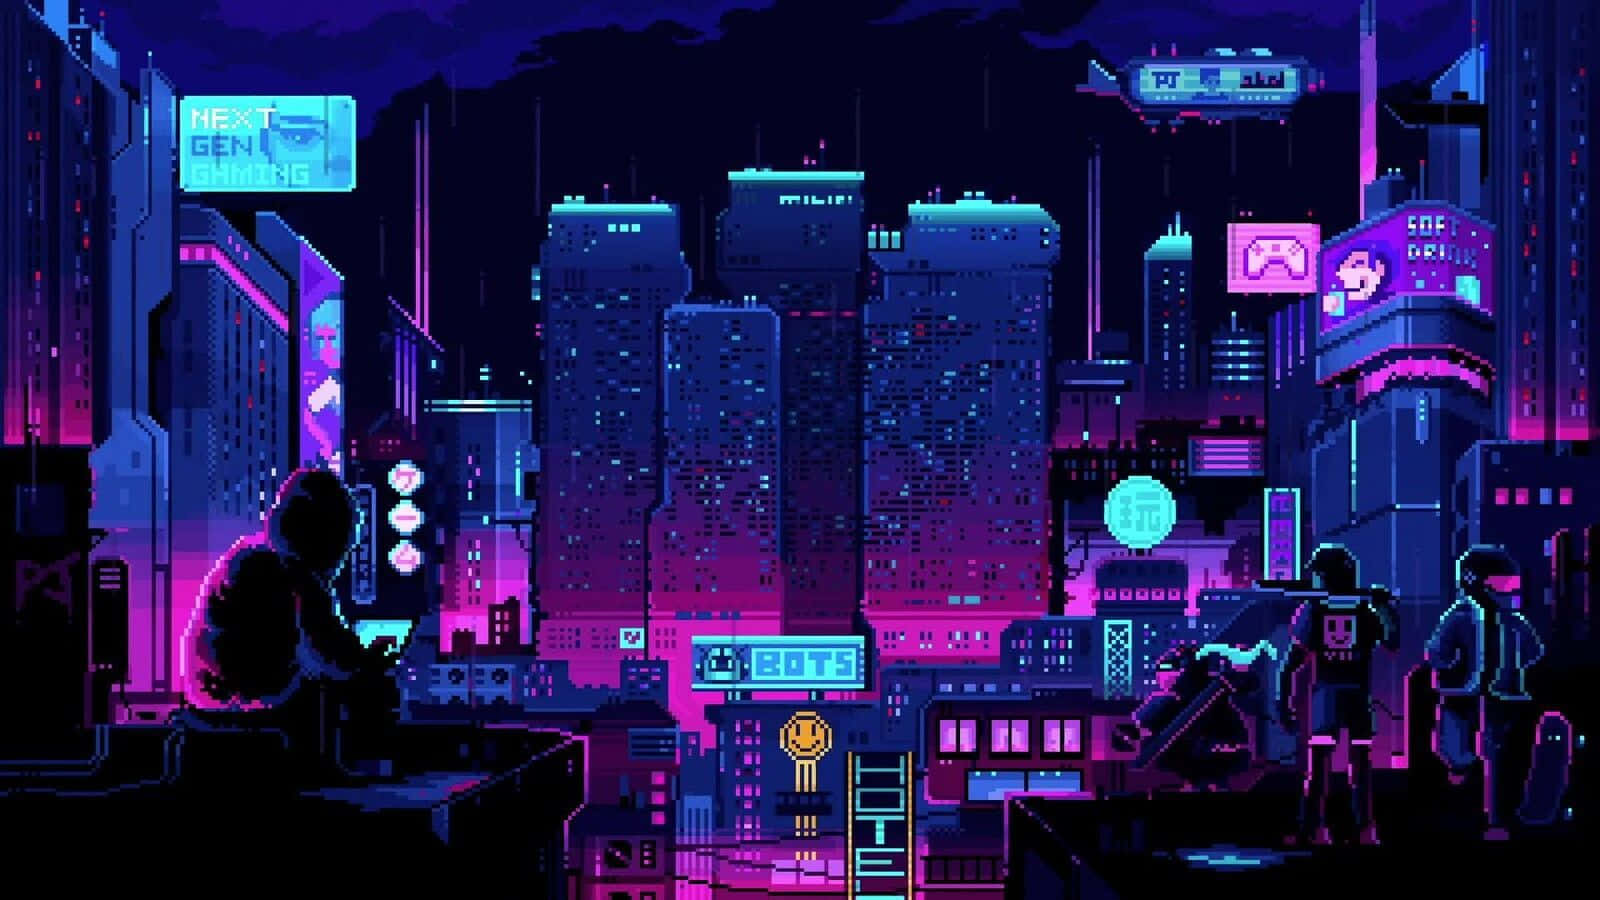 Explore The Neon-lit Cyberpunk City In This Pixel Art! Background